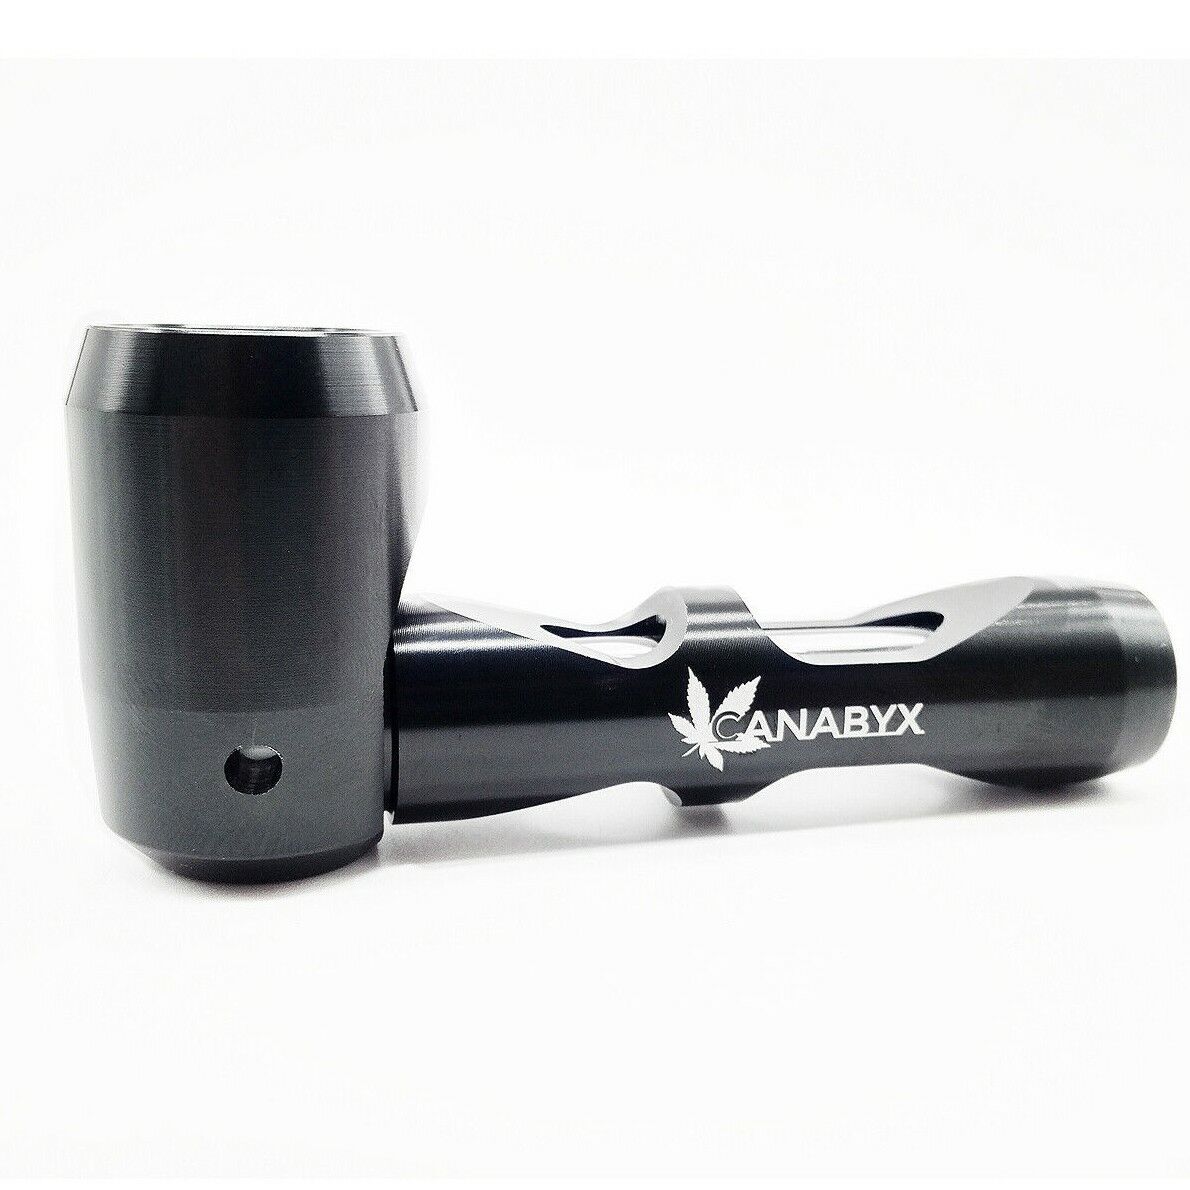 High Grade CANABYX Aluminum, Tobacco Pipes Creative Smoking Pipe, by Canabyx BLK